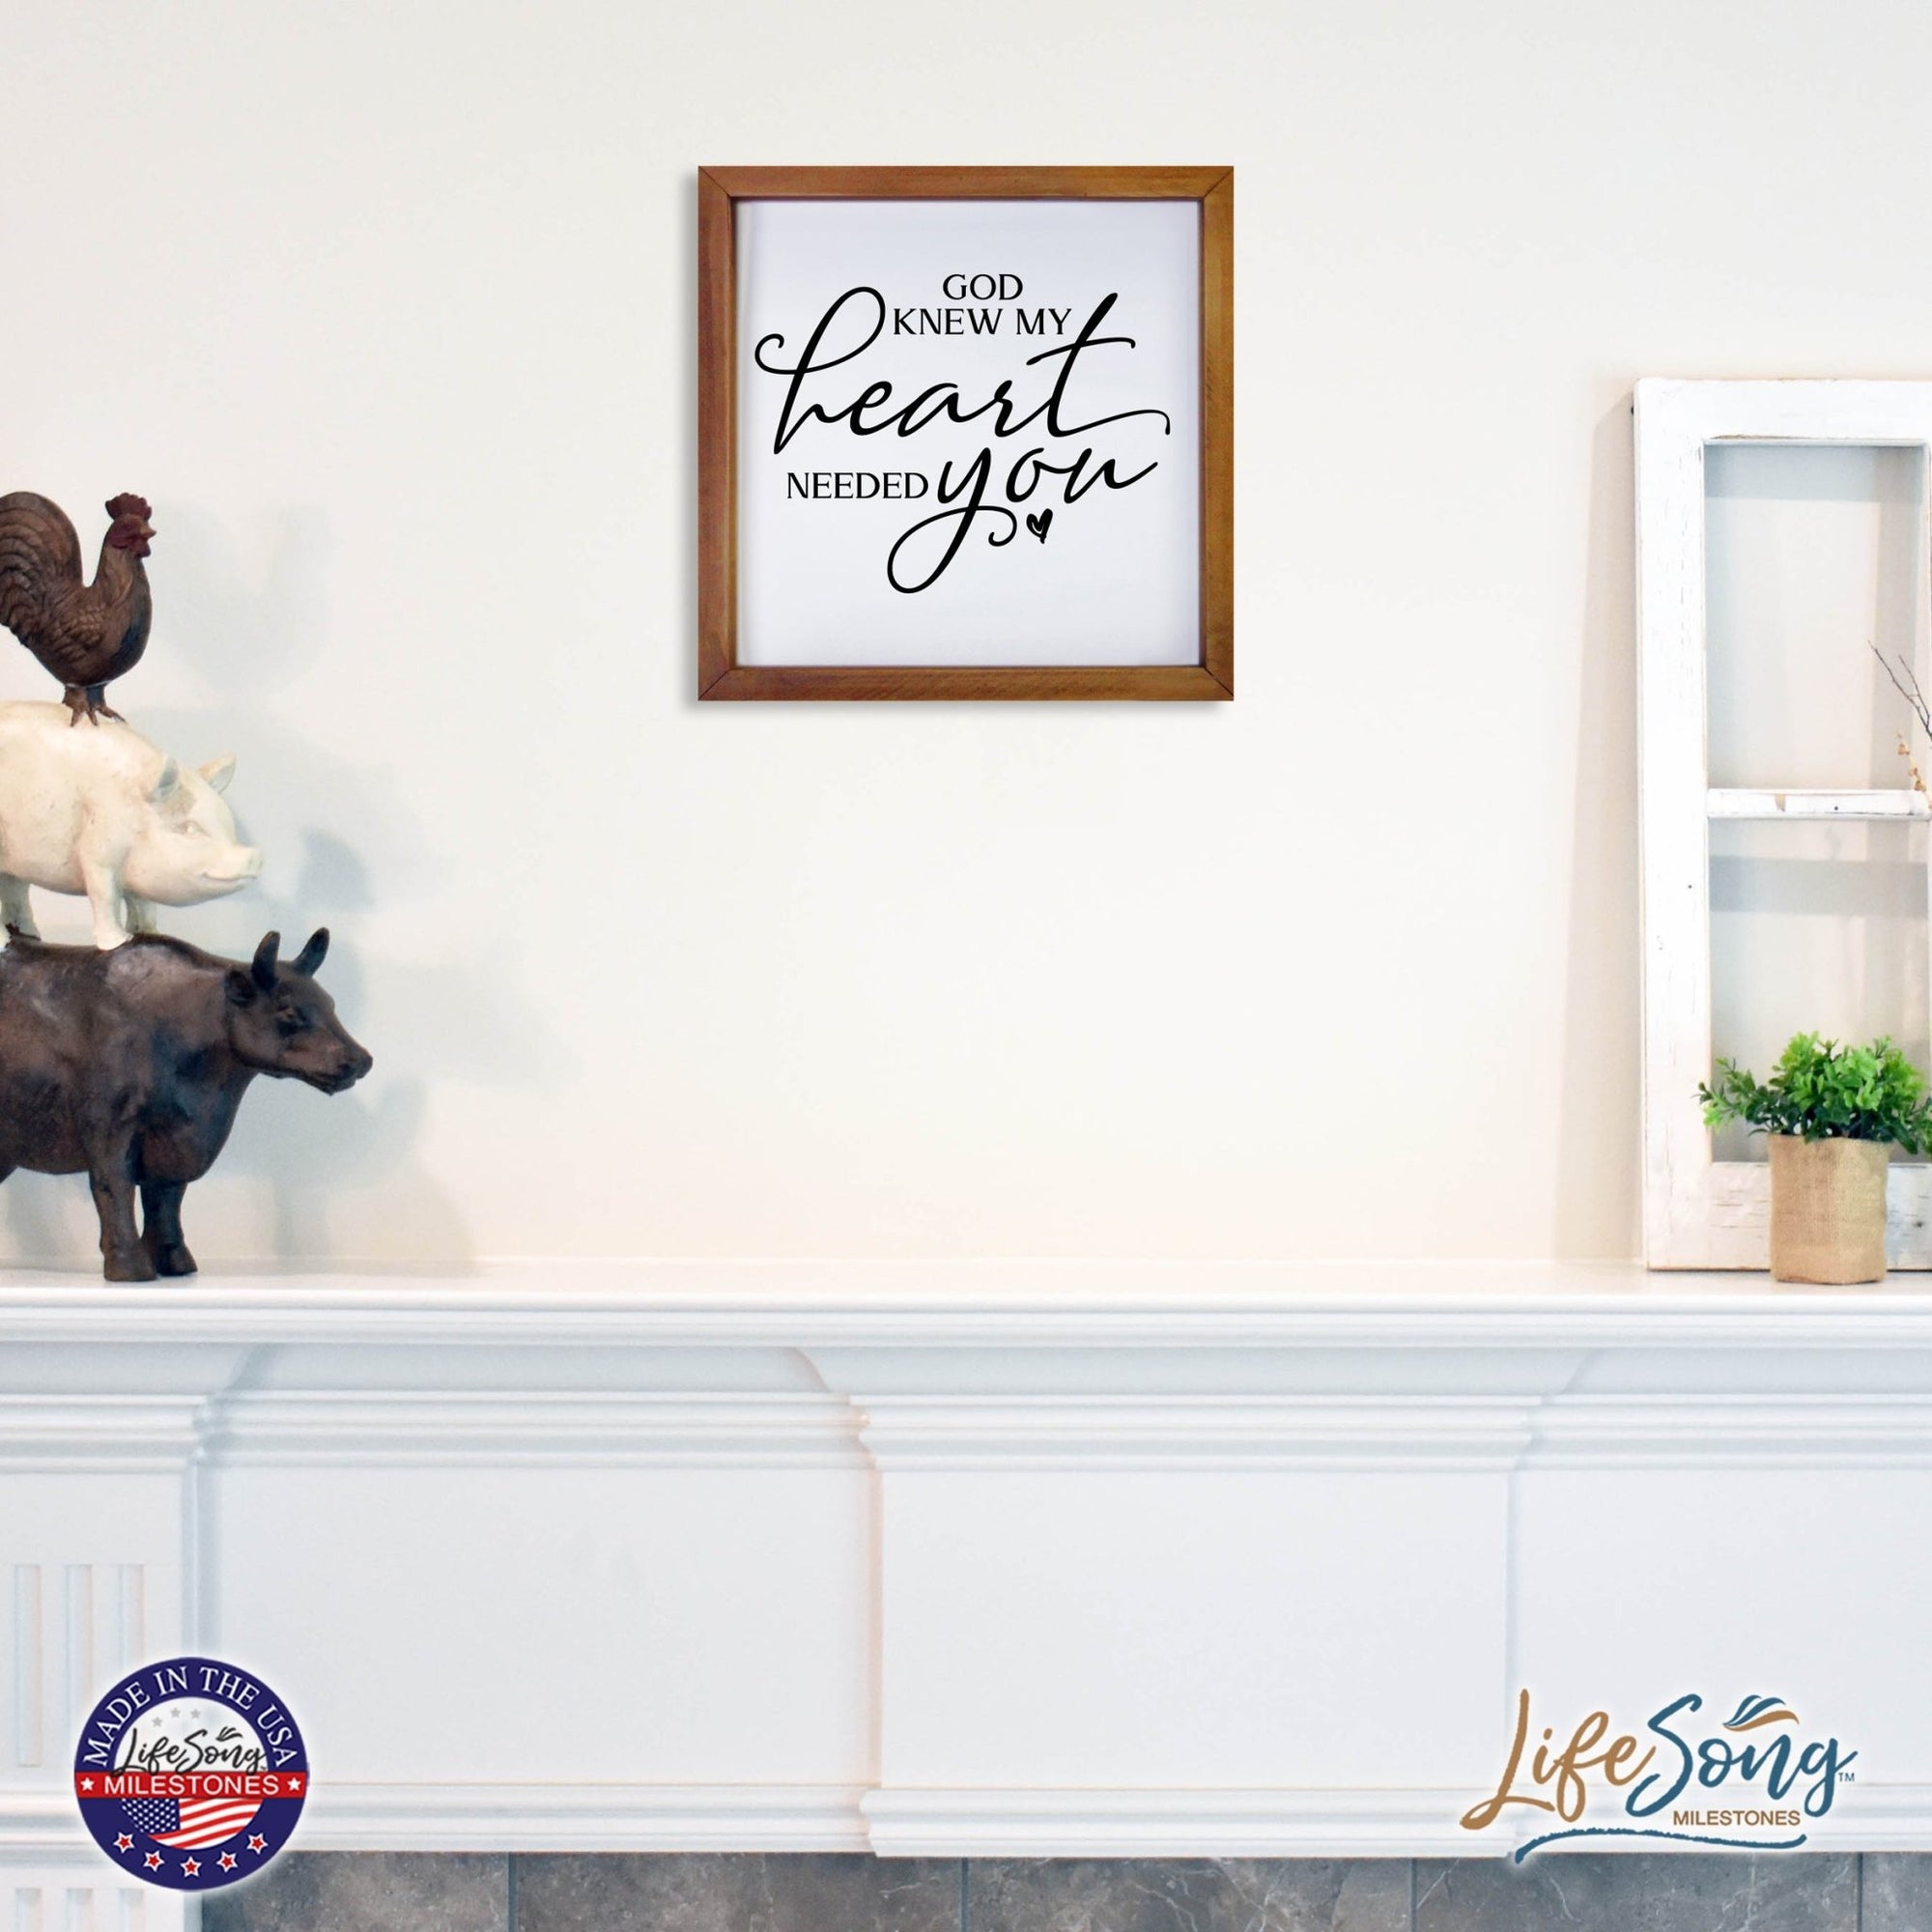 Inspiring Modern Framed Shadow Box 7x7in - God Knew My Heart Needed You (Script) - LifeSong Milestones